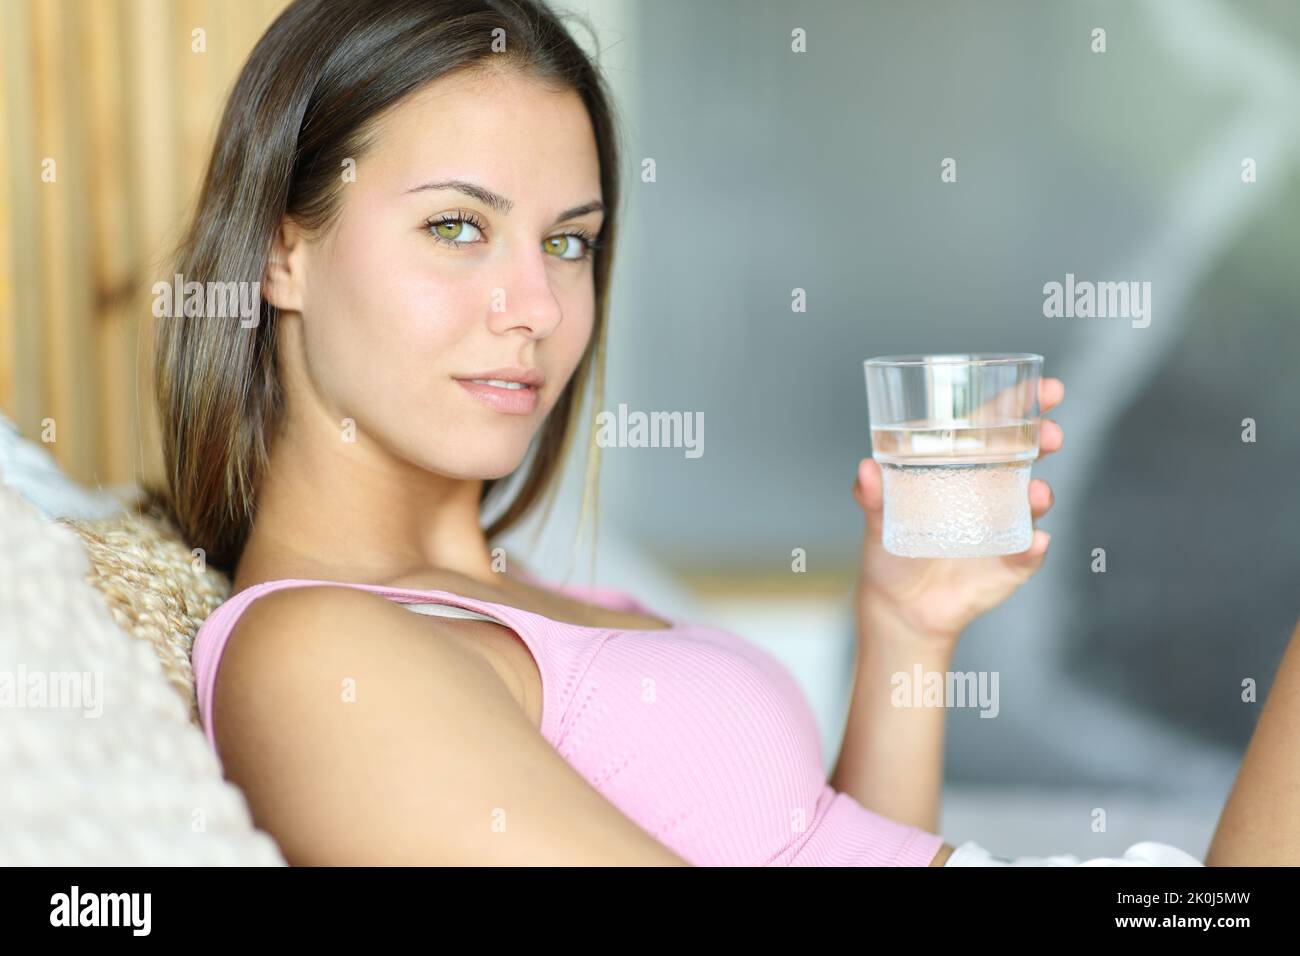 Beauty woman holding water glass looks at you sitting on a bed at home Stock Photo